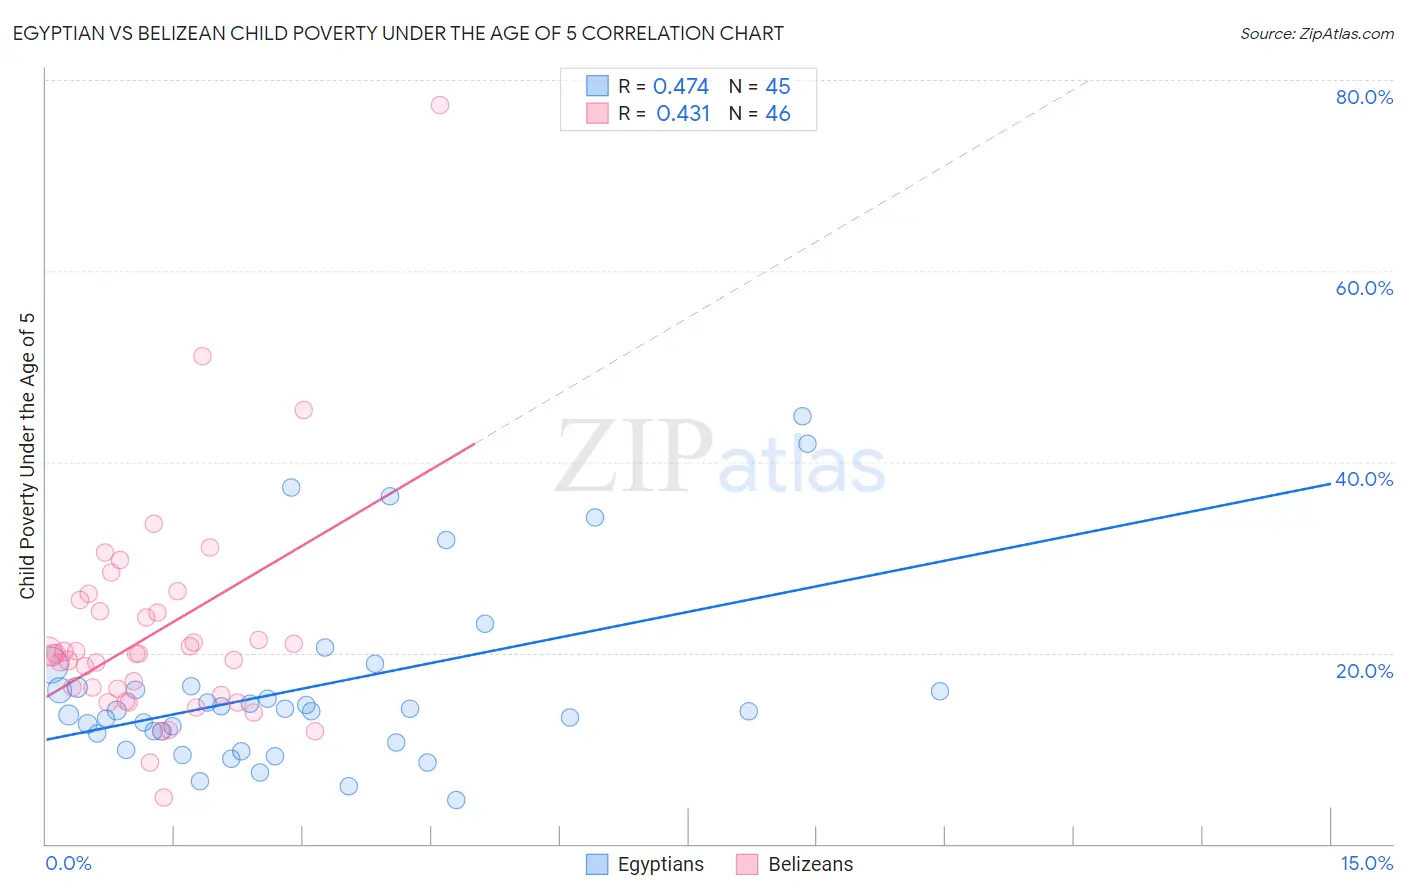 Egyptian vs Belizean Child Poverty Under the Age of 5